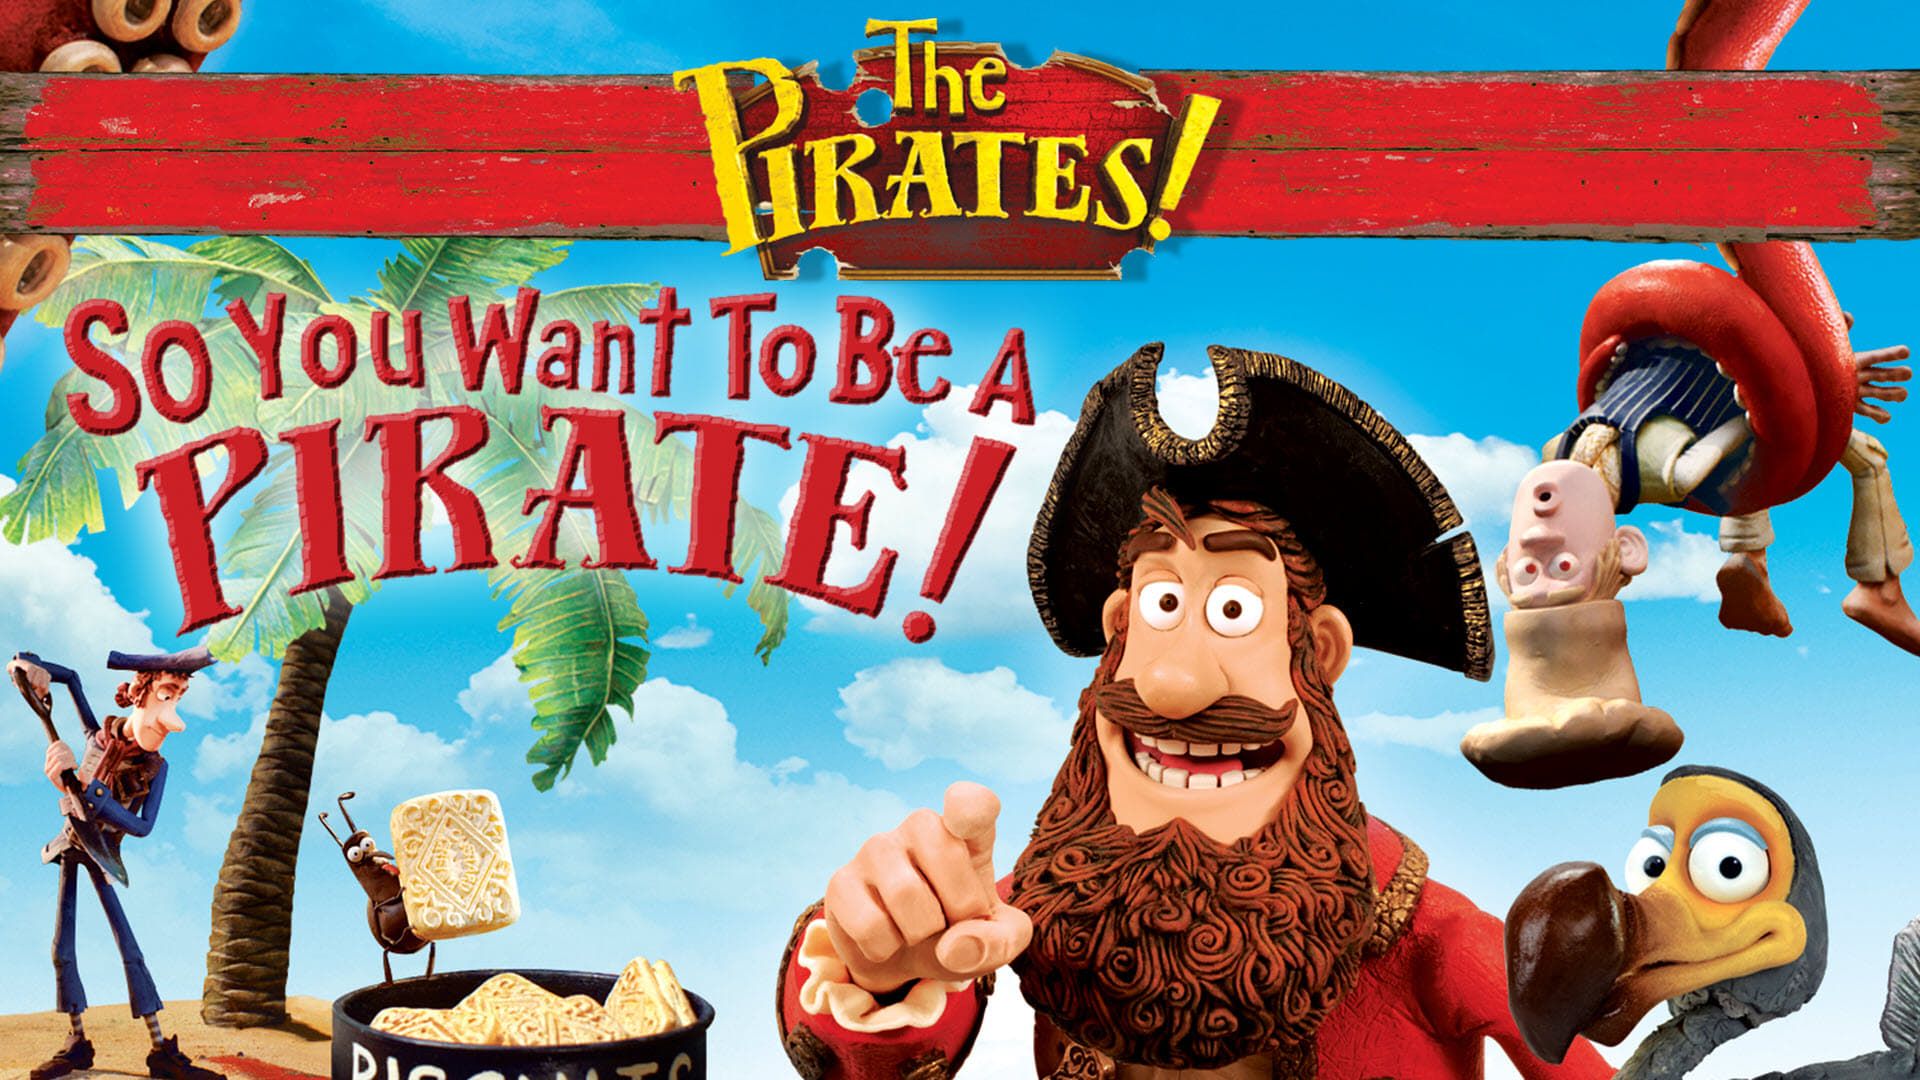 So You Want to Be a Pirate! background